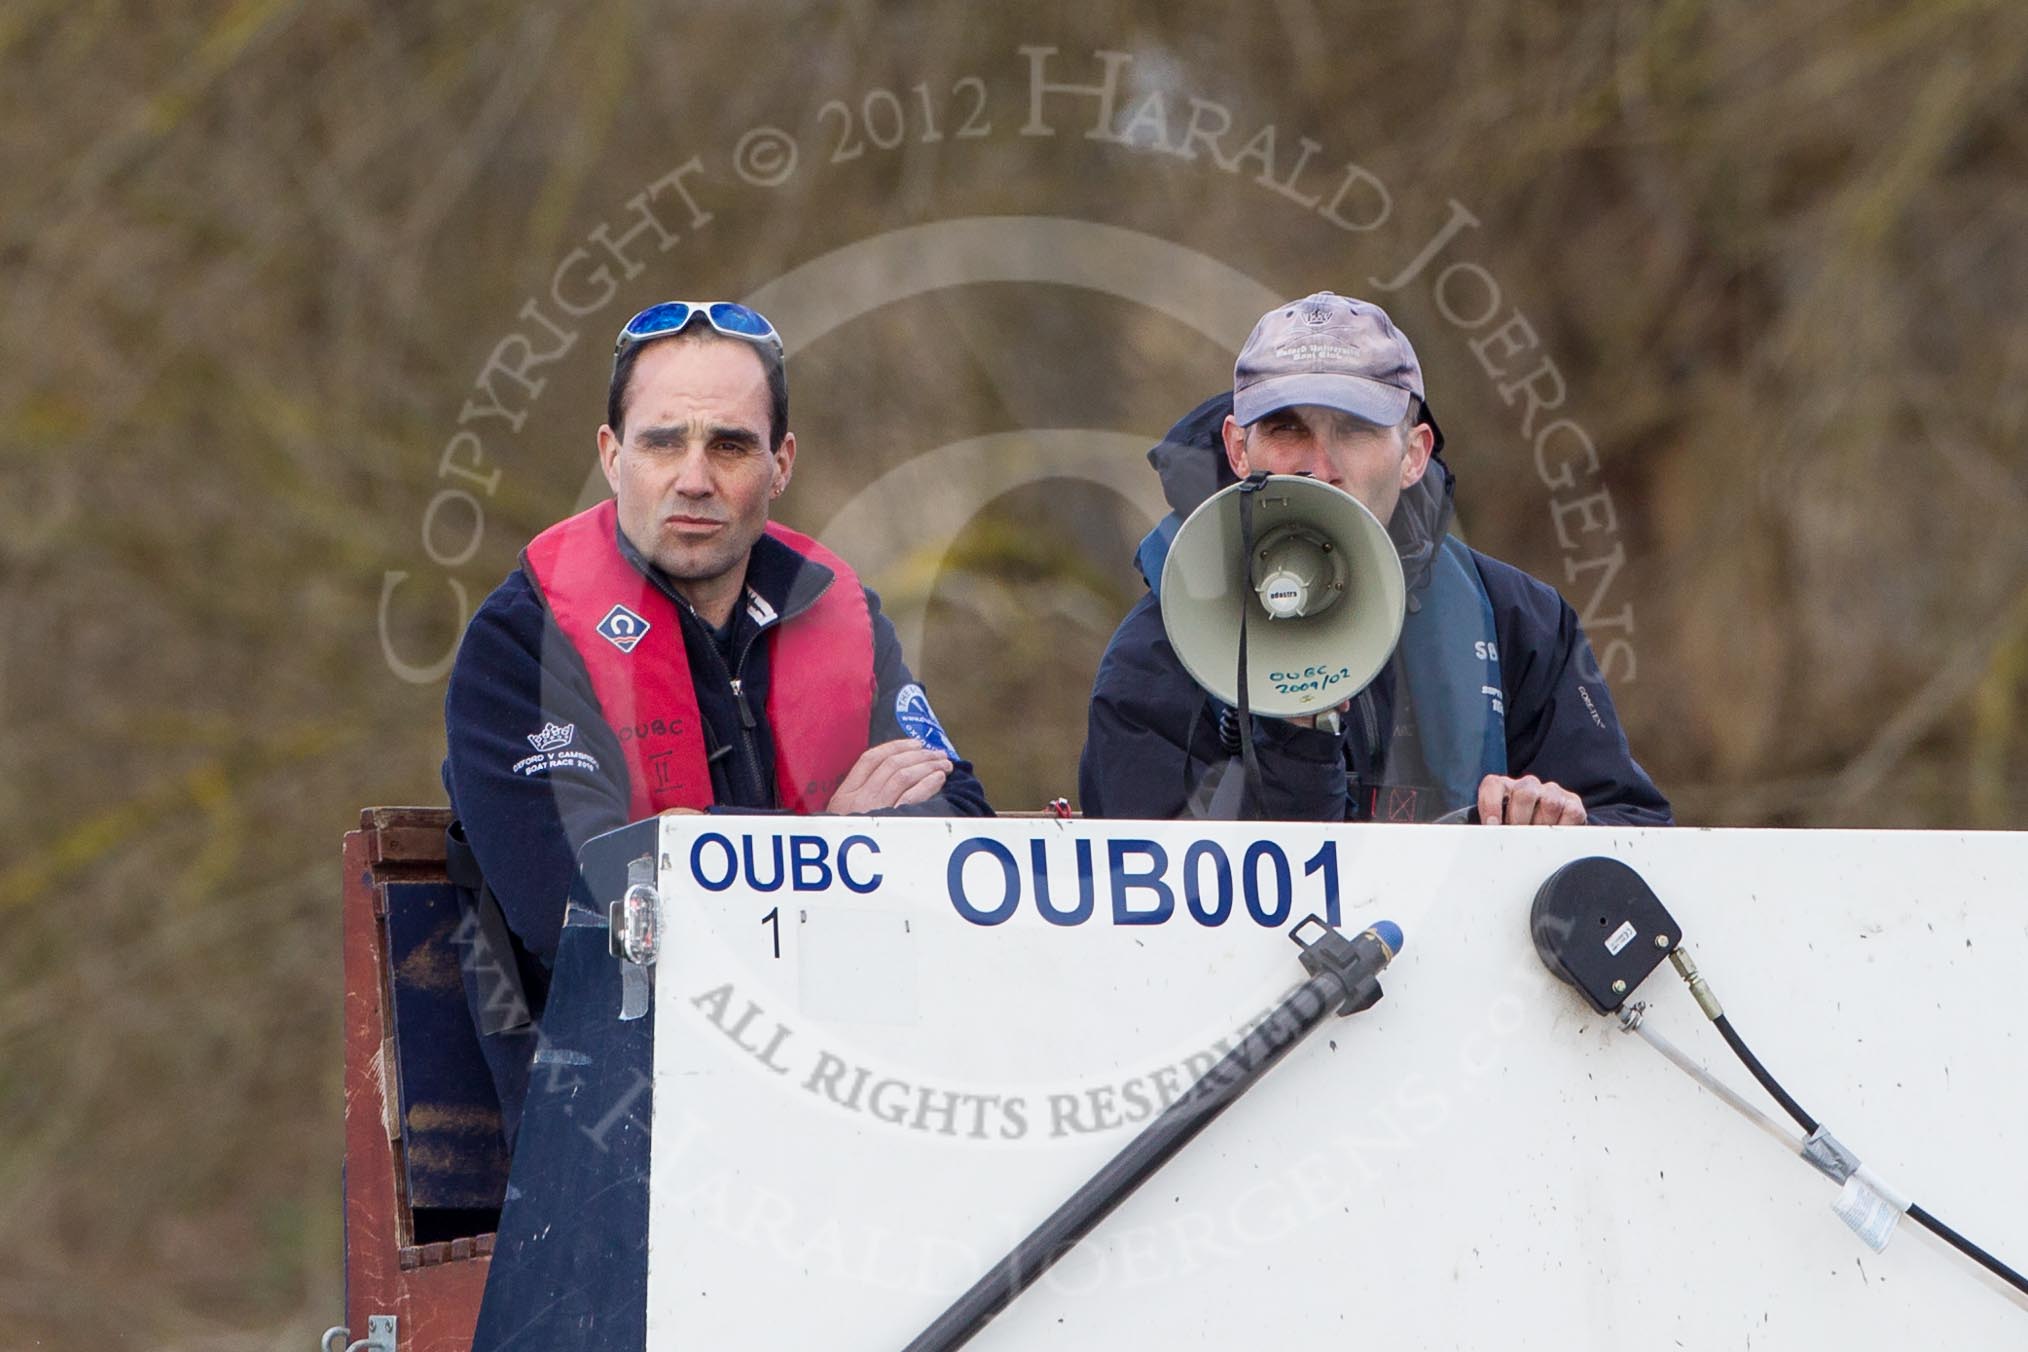 The Boat Race season 2012 - OUBC training: OUBC coach Filipe Salbany and Chief Coach Sean Bowden..


Oxfordshire,
United Kingdom,
on 20 March 2012 at 15:08, image #21